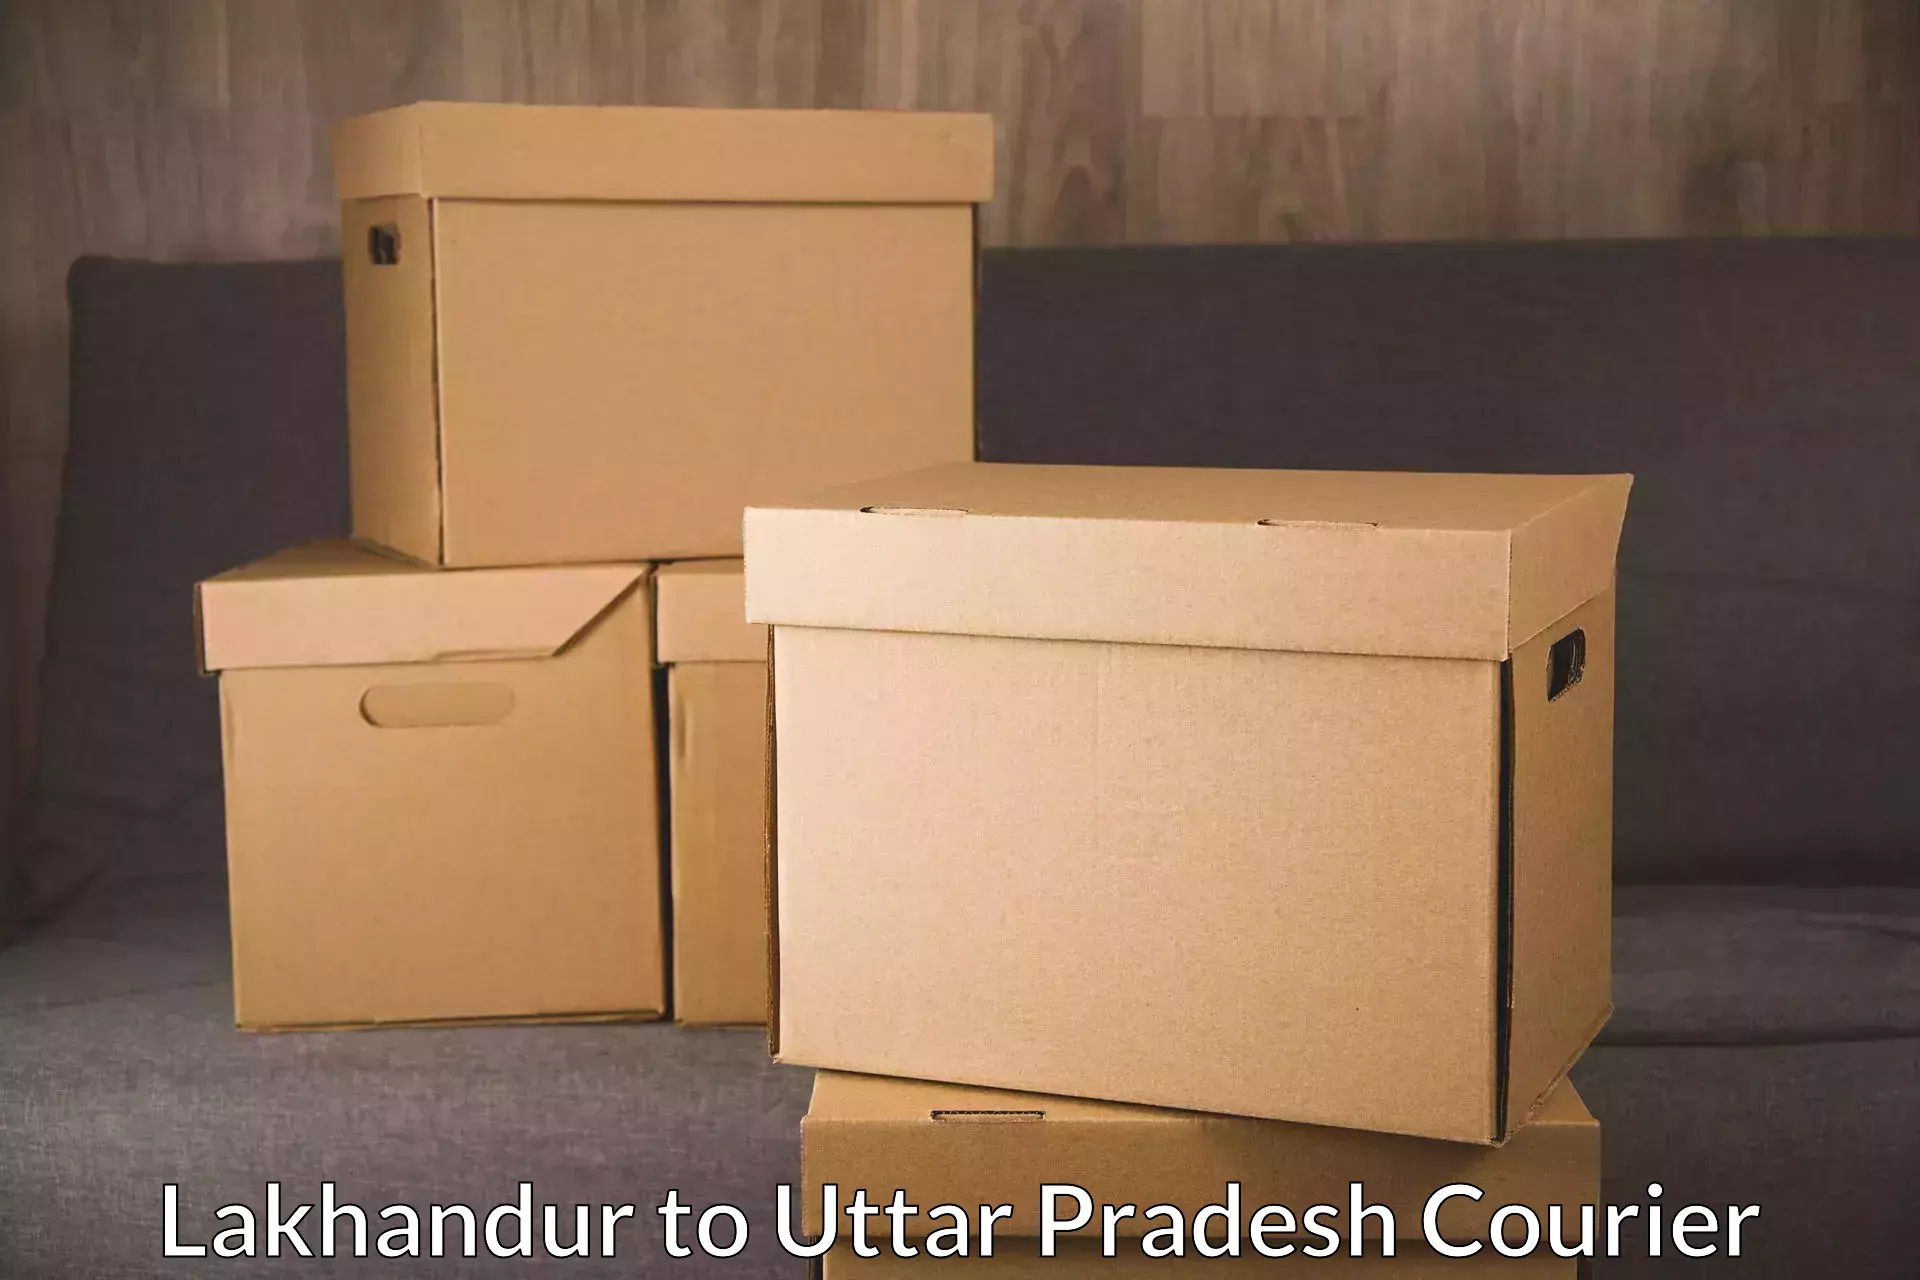 International courier networks Lakhandur to Anpara